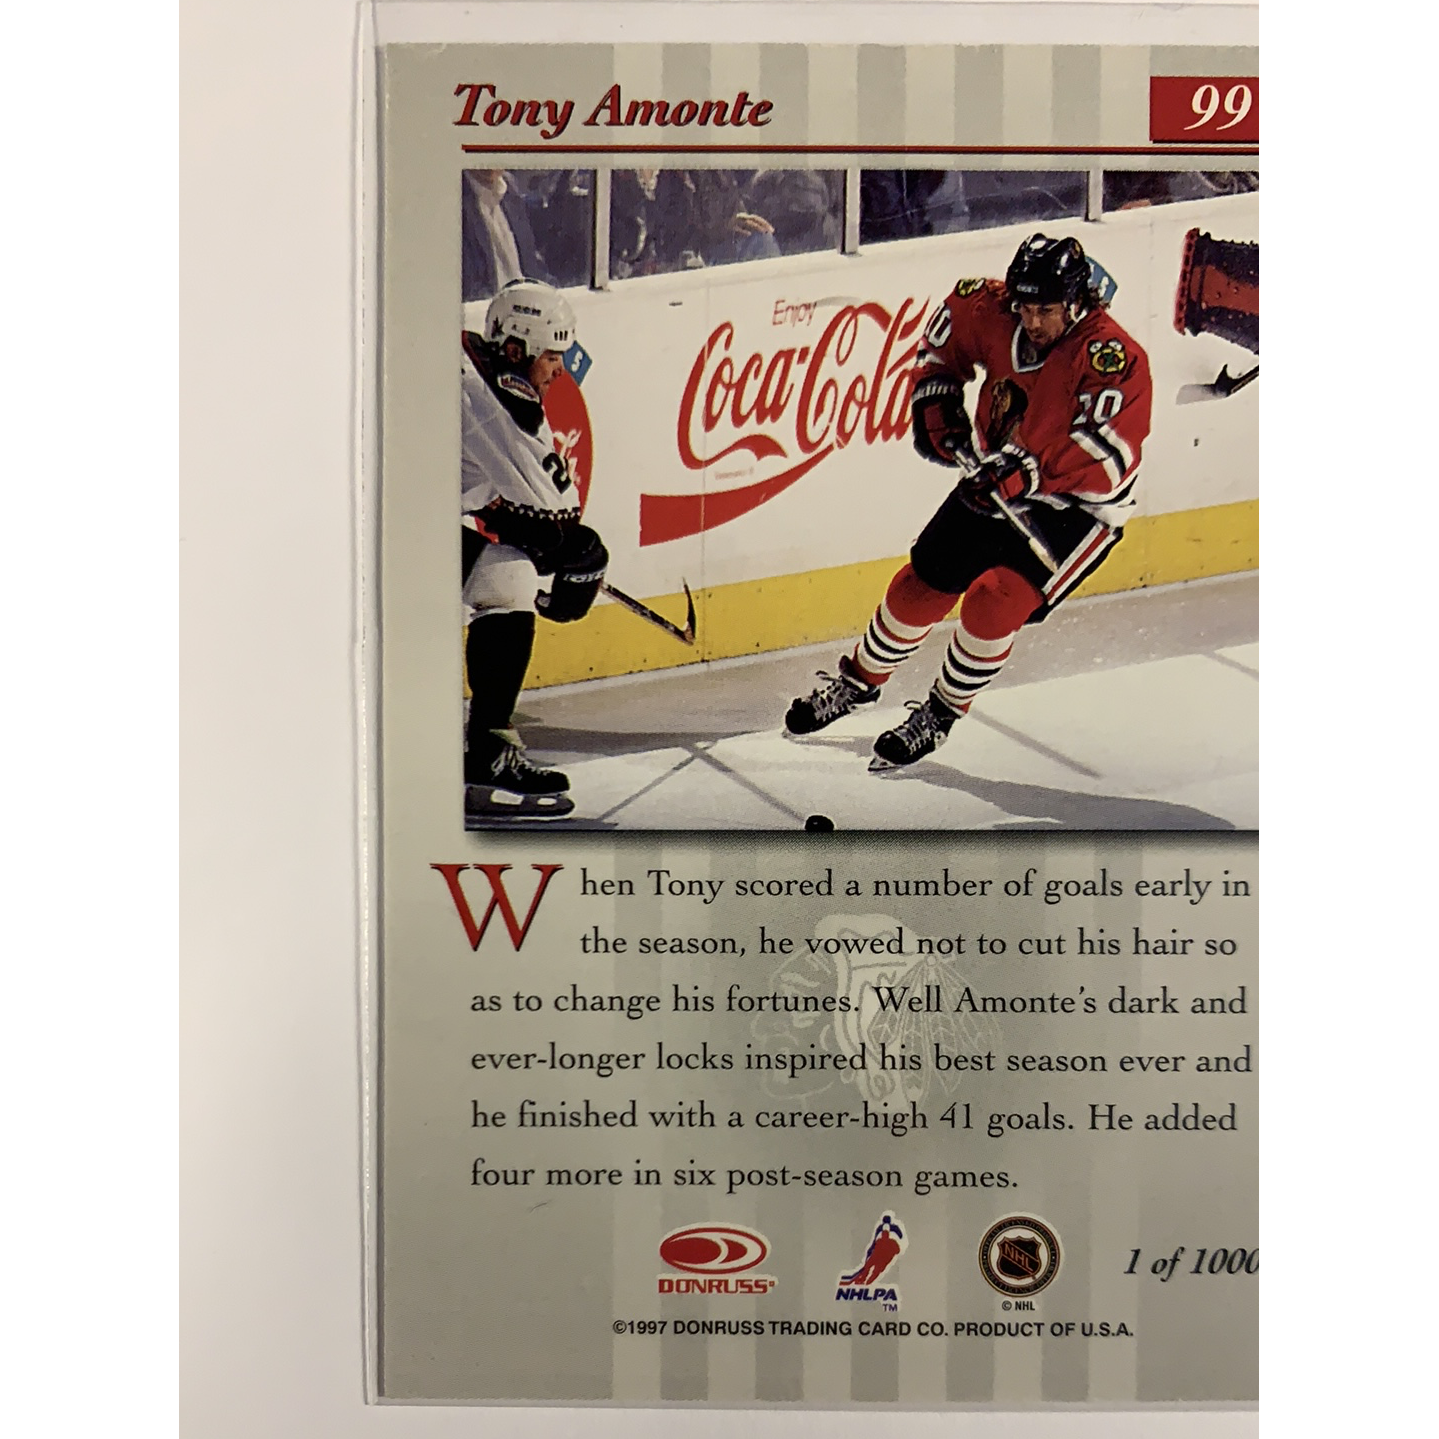  1997 Donruss 97-98 Studio Tony Amonte Press Proof 1 of 1000  Local Legends Cards & Collectibles